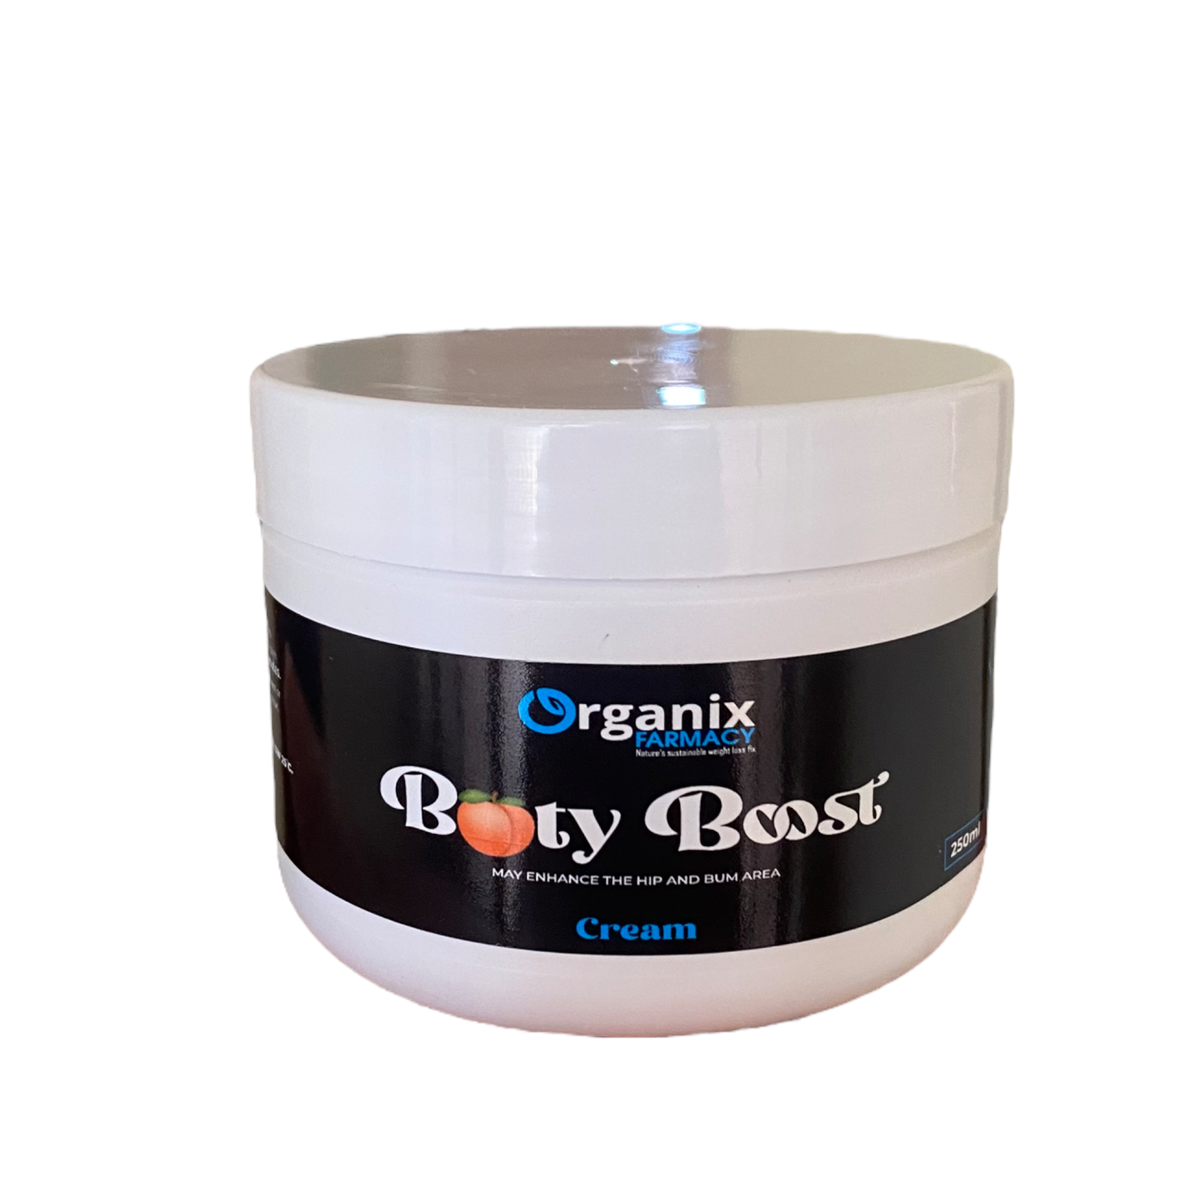 Organix Booty Booster Cream- 250g, Shop Today. Get it Tomorrow!